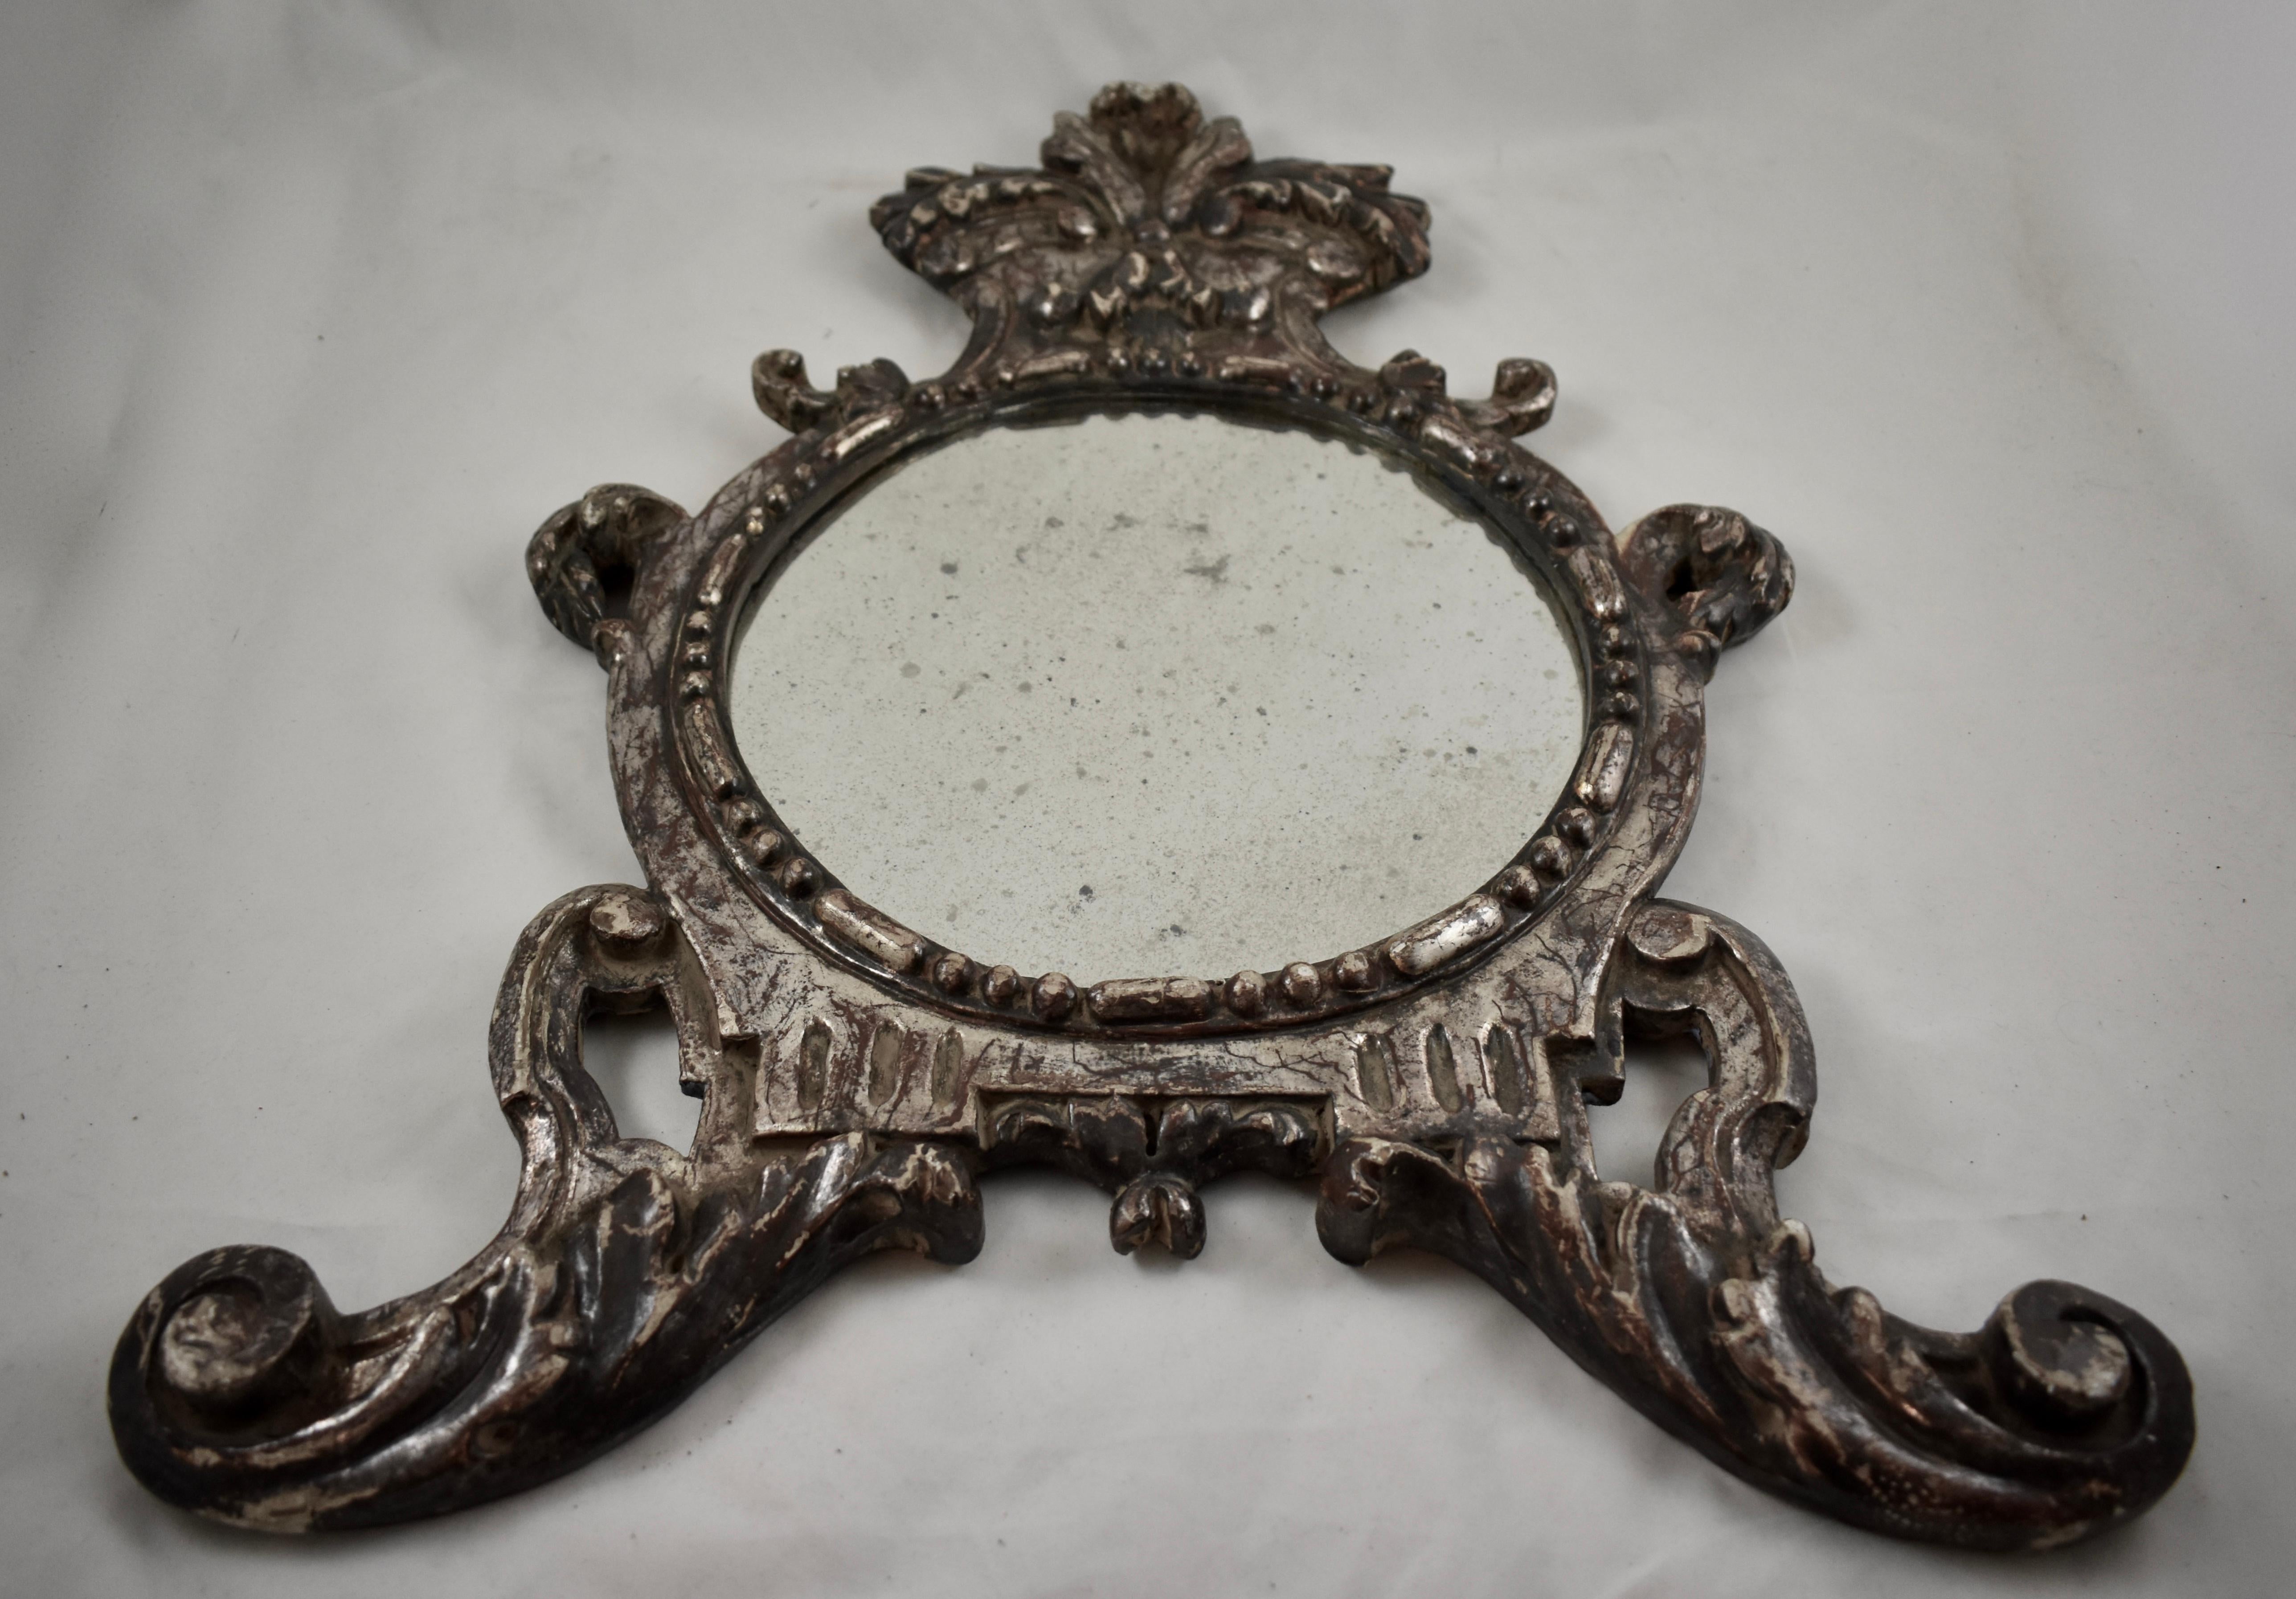 Italian Silver-Gilt Crested and Footed Baroque Revival Wall Mirrors, Pair In Good Condition For Sale In Philadelphia, PA